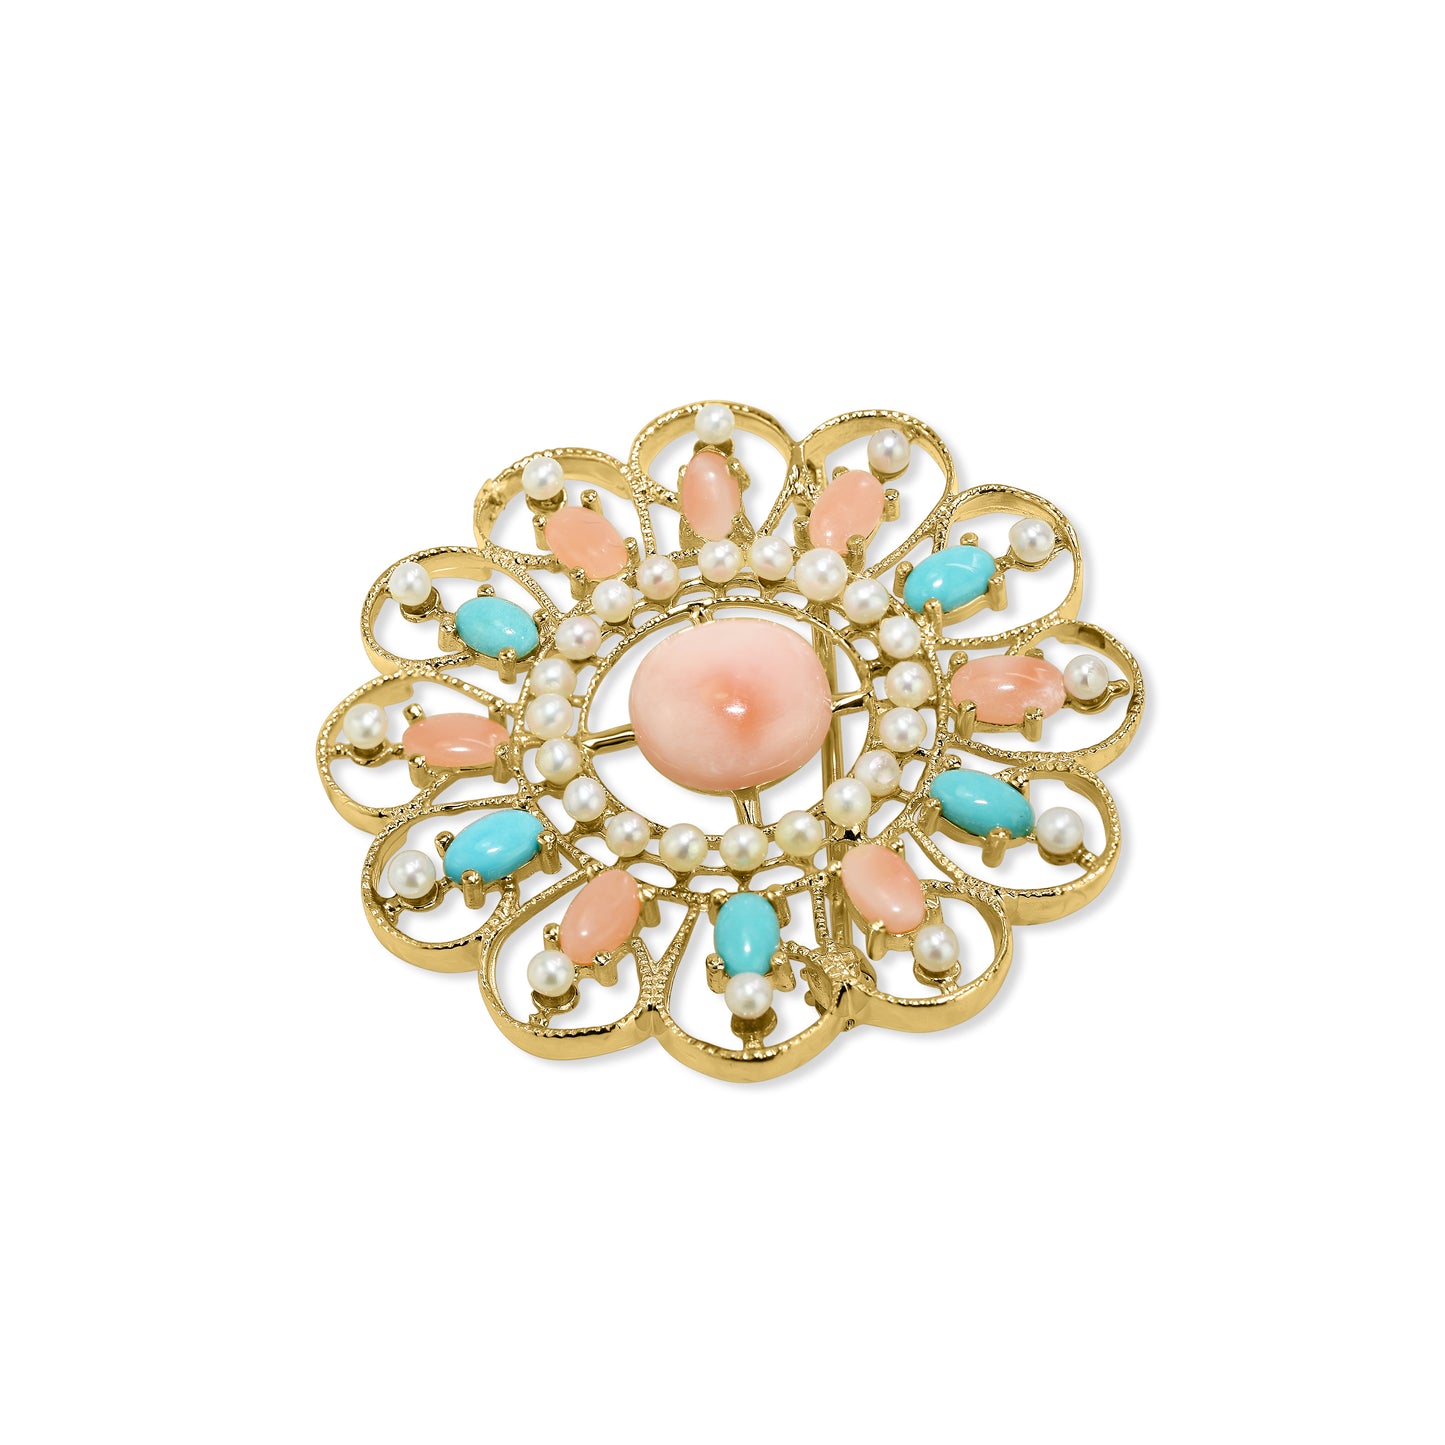 14k Natural Coral Turquoise Pearl Brooch Pin